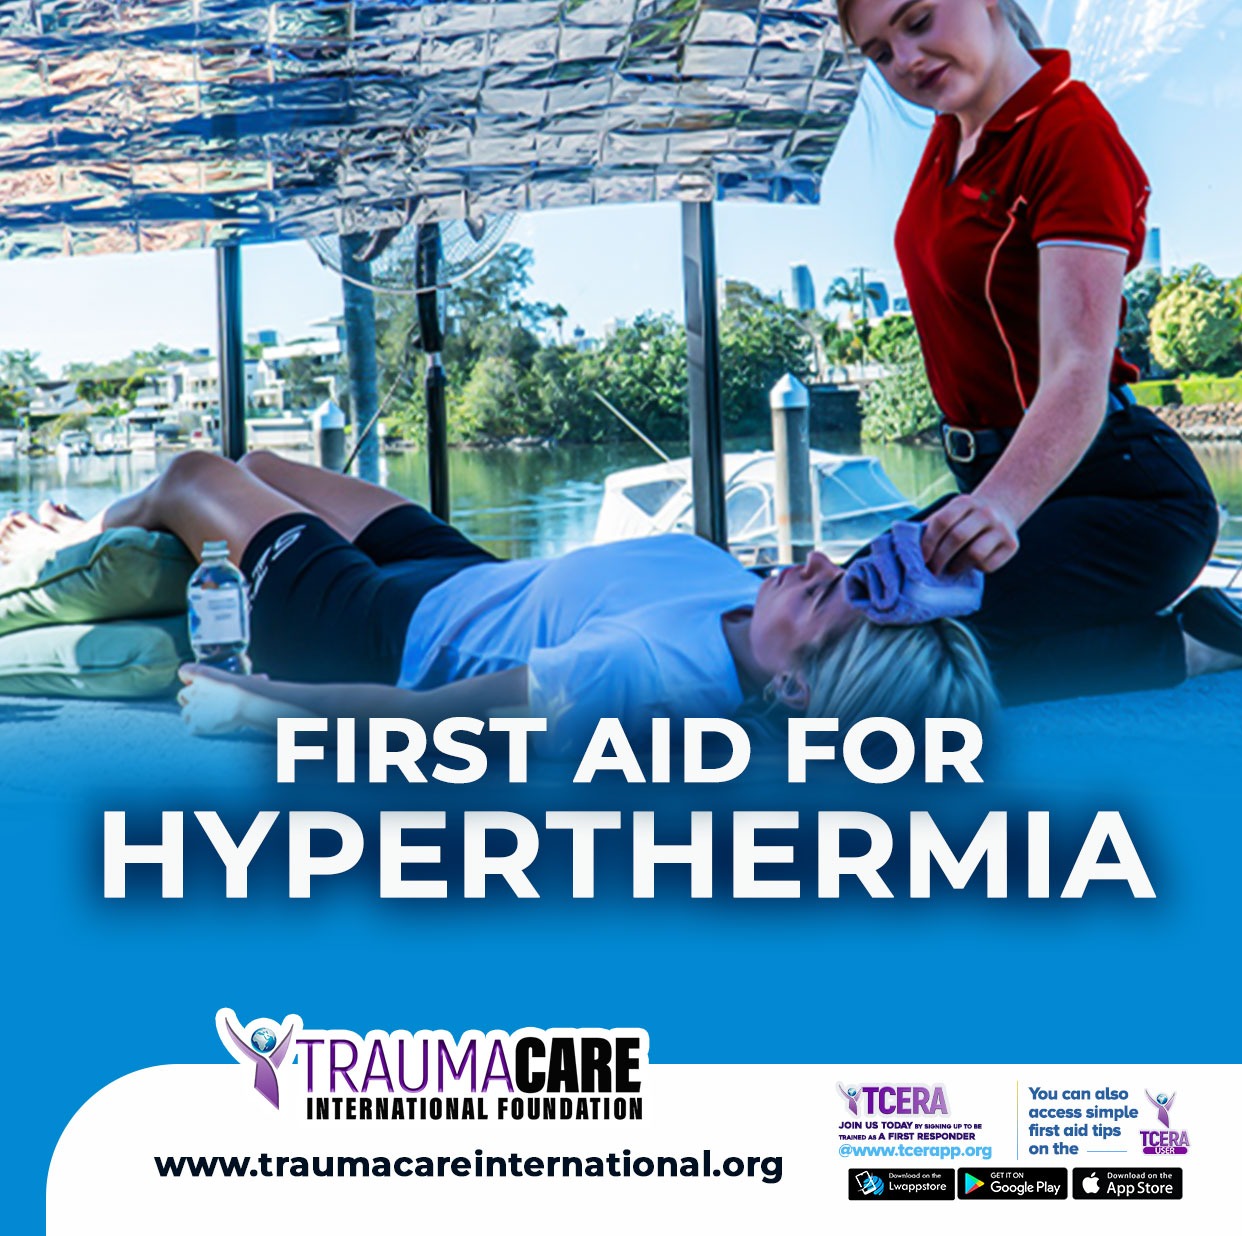 FIRST AID FOR HYPERTHERMIA